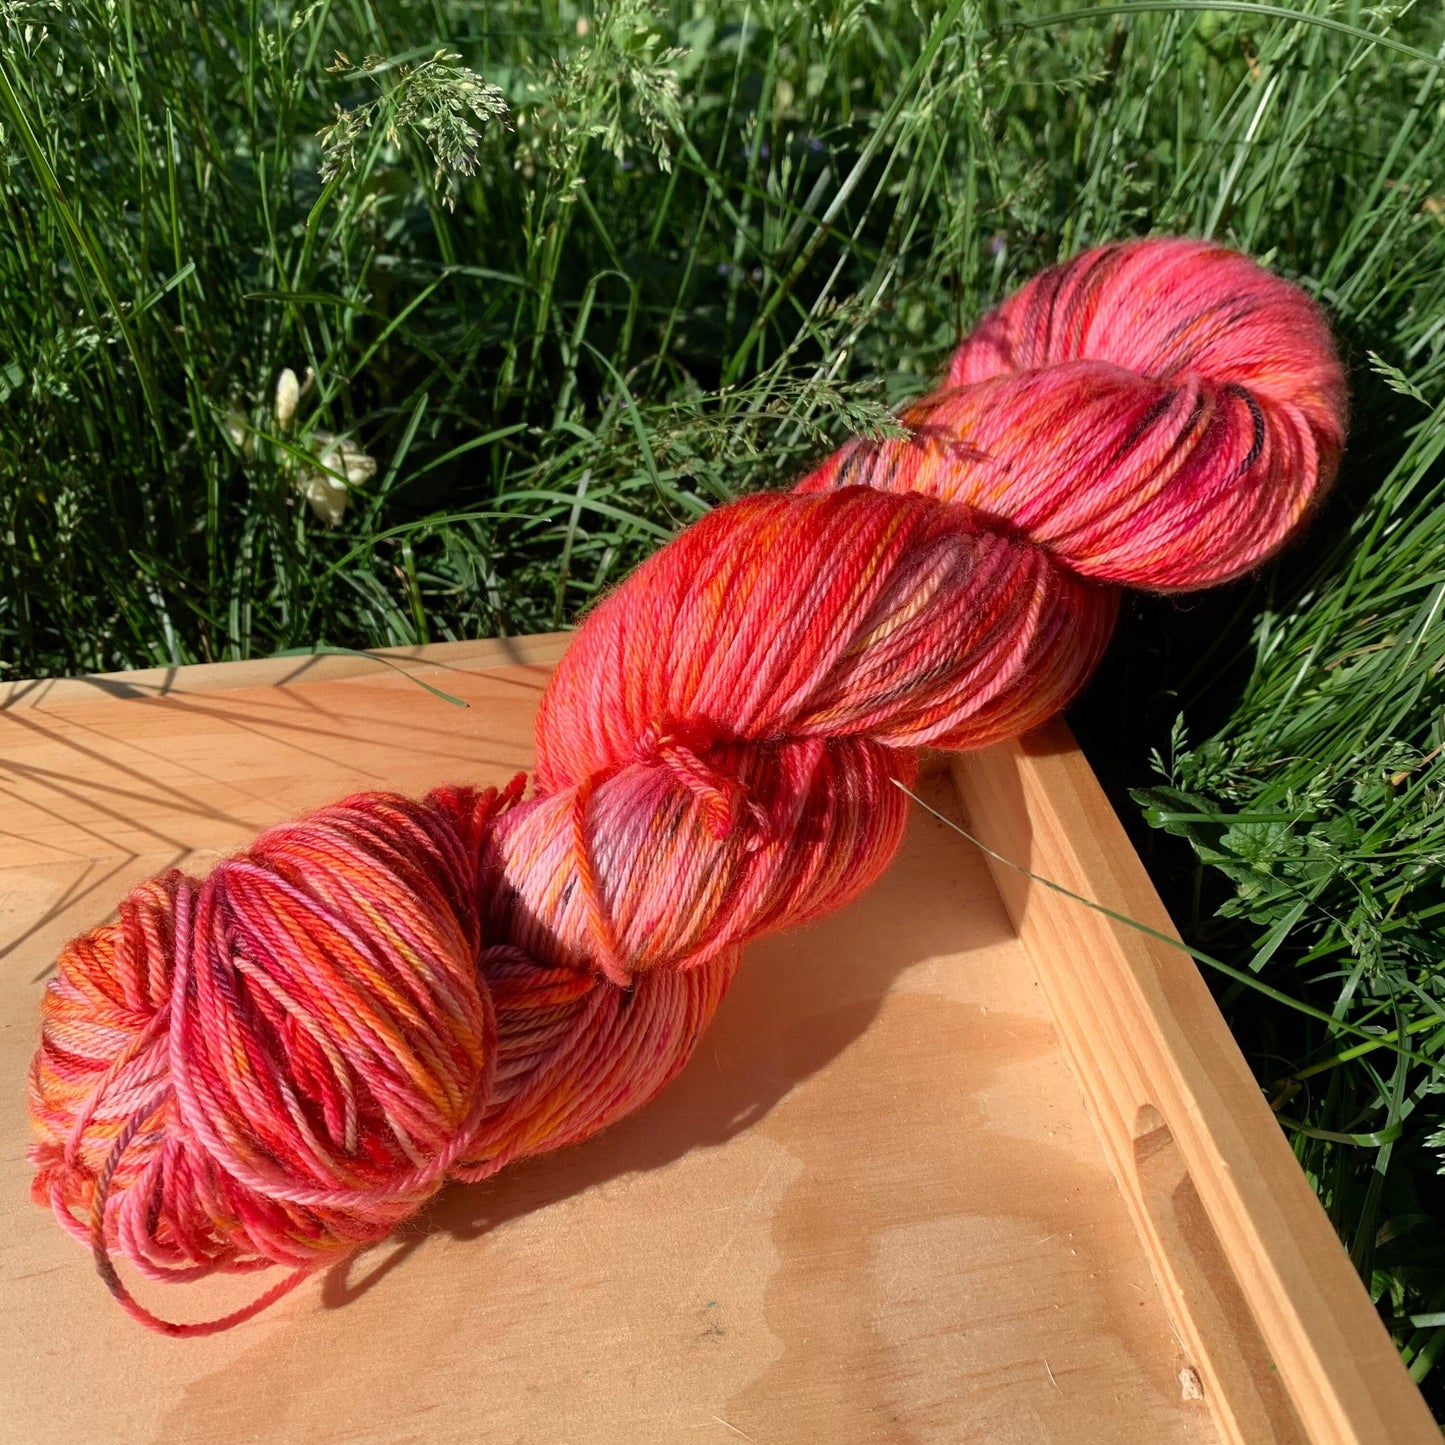 A skein of black and pink speckled red hand-dyed yarn.